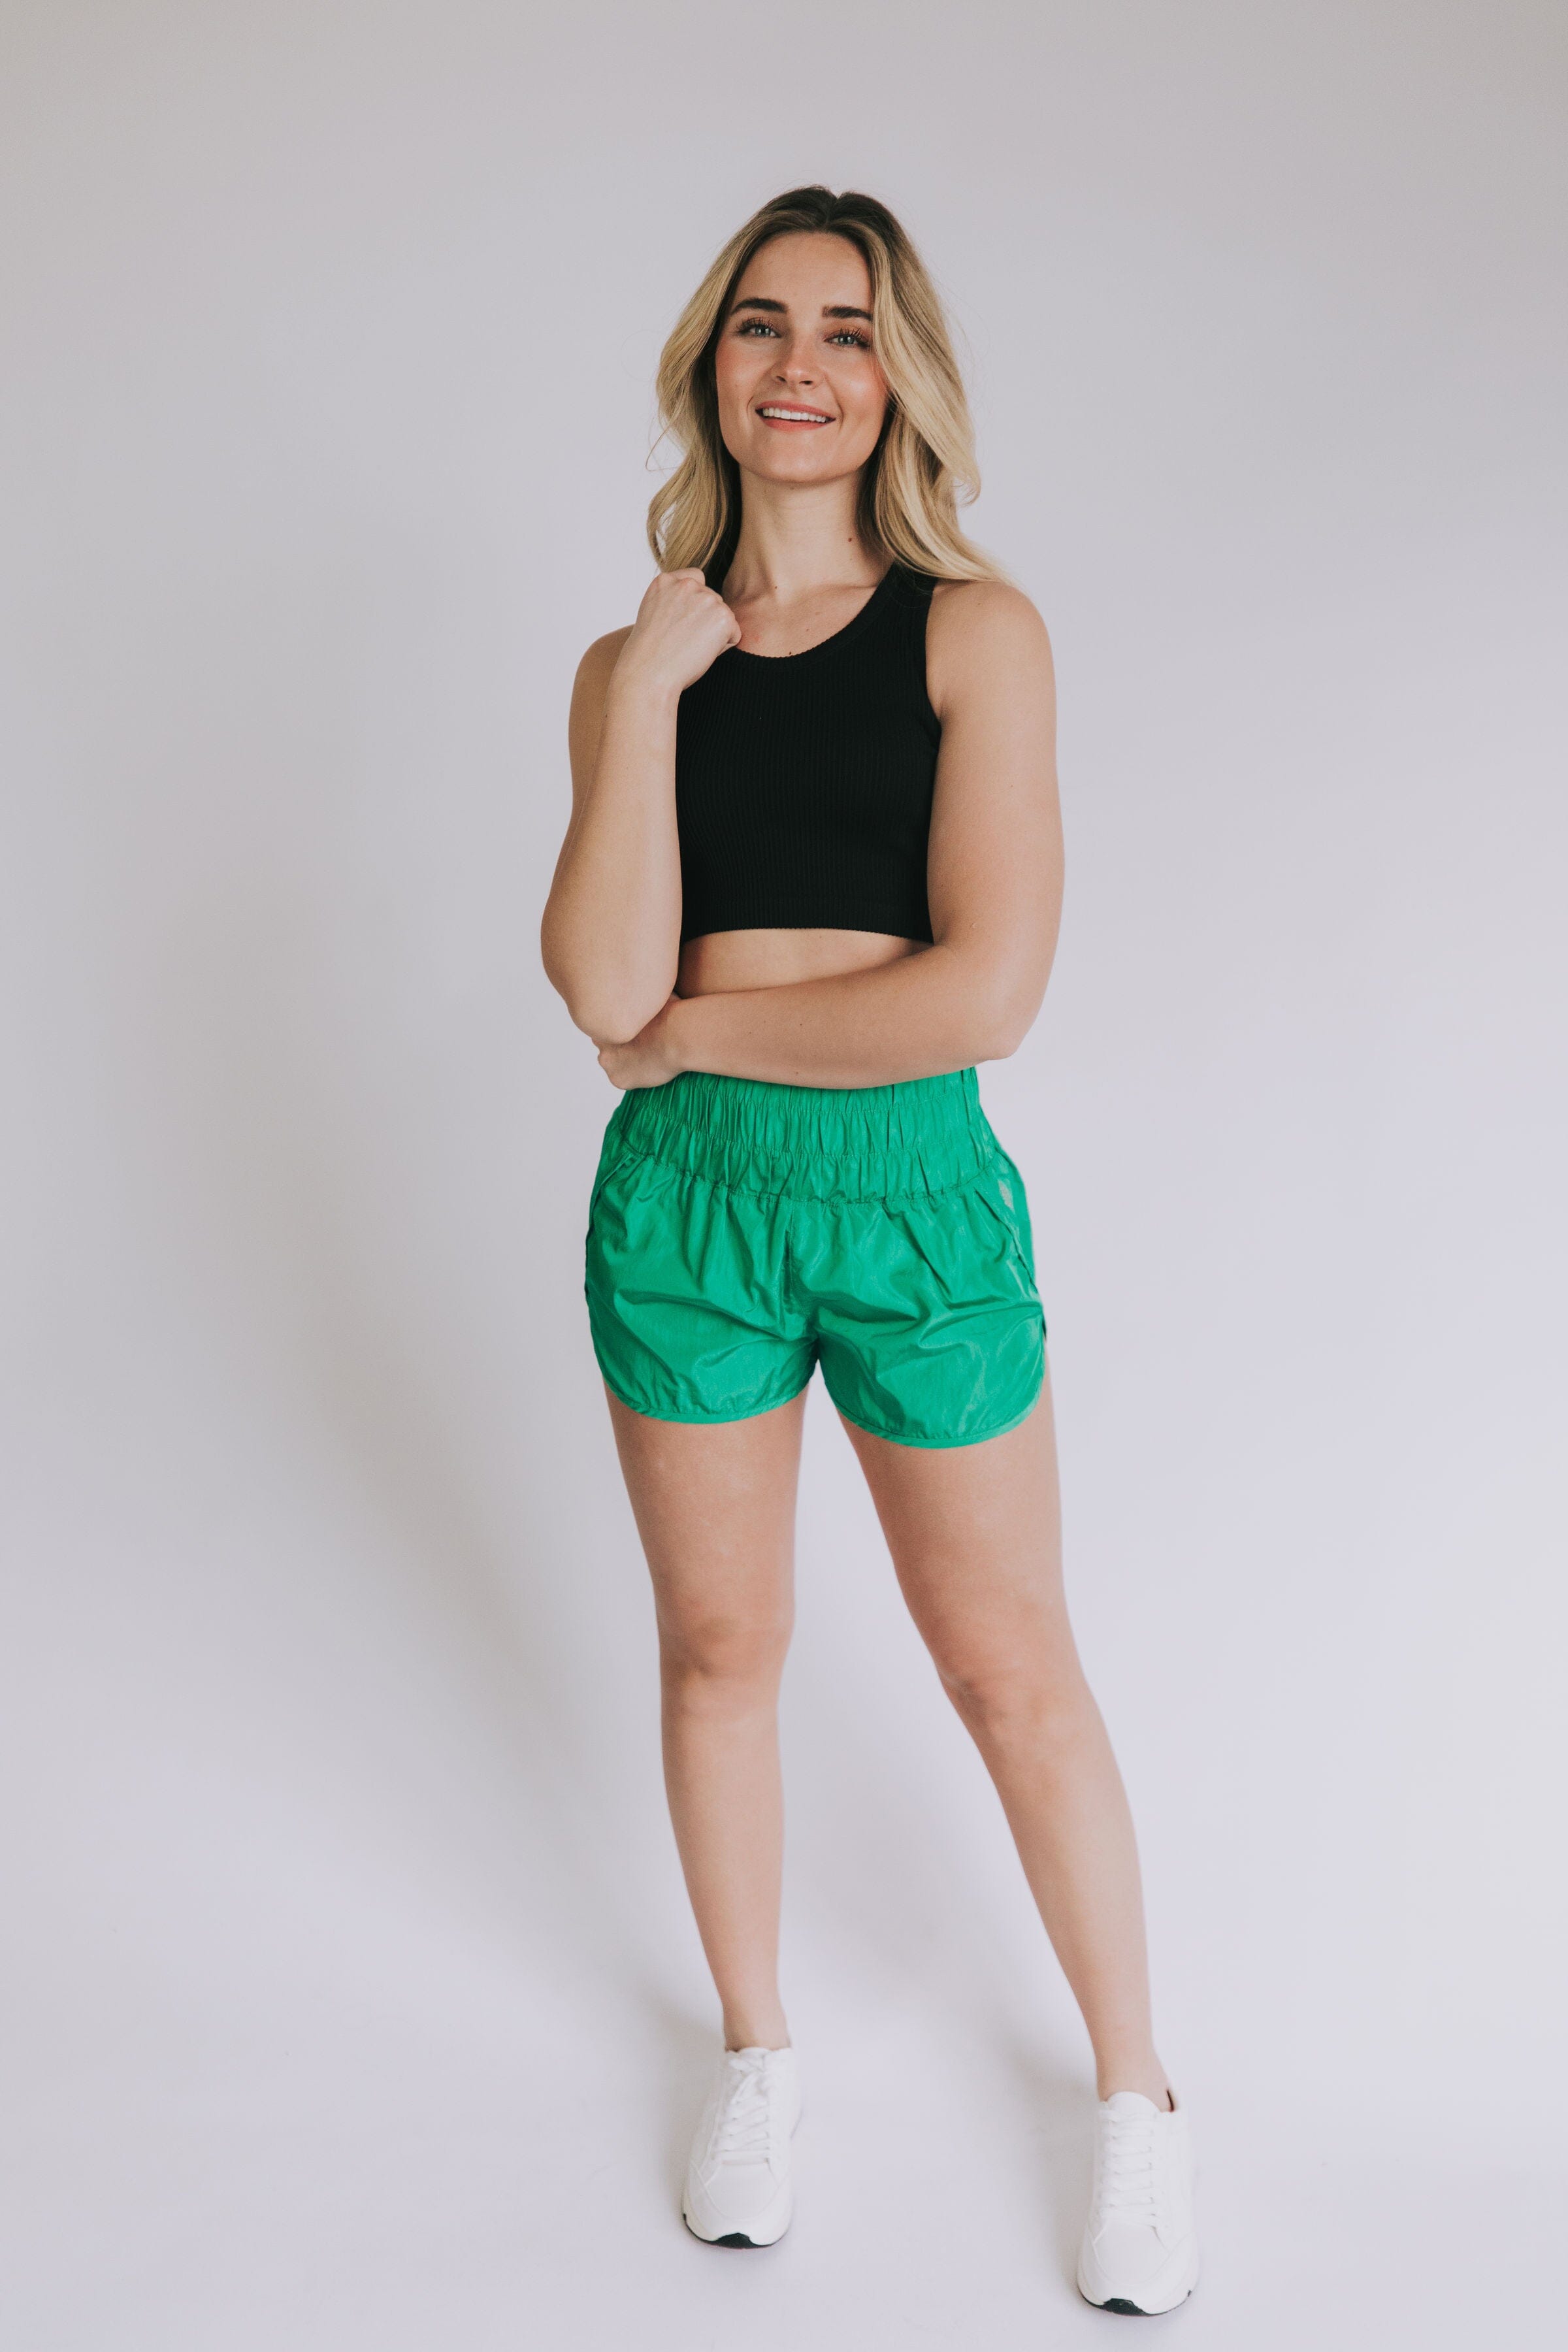 Sharna Cropped Tank - 2 Colors!